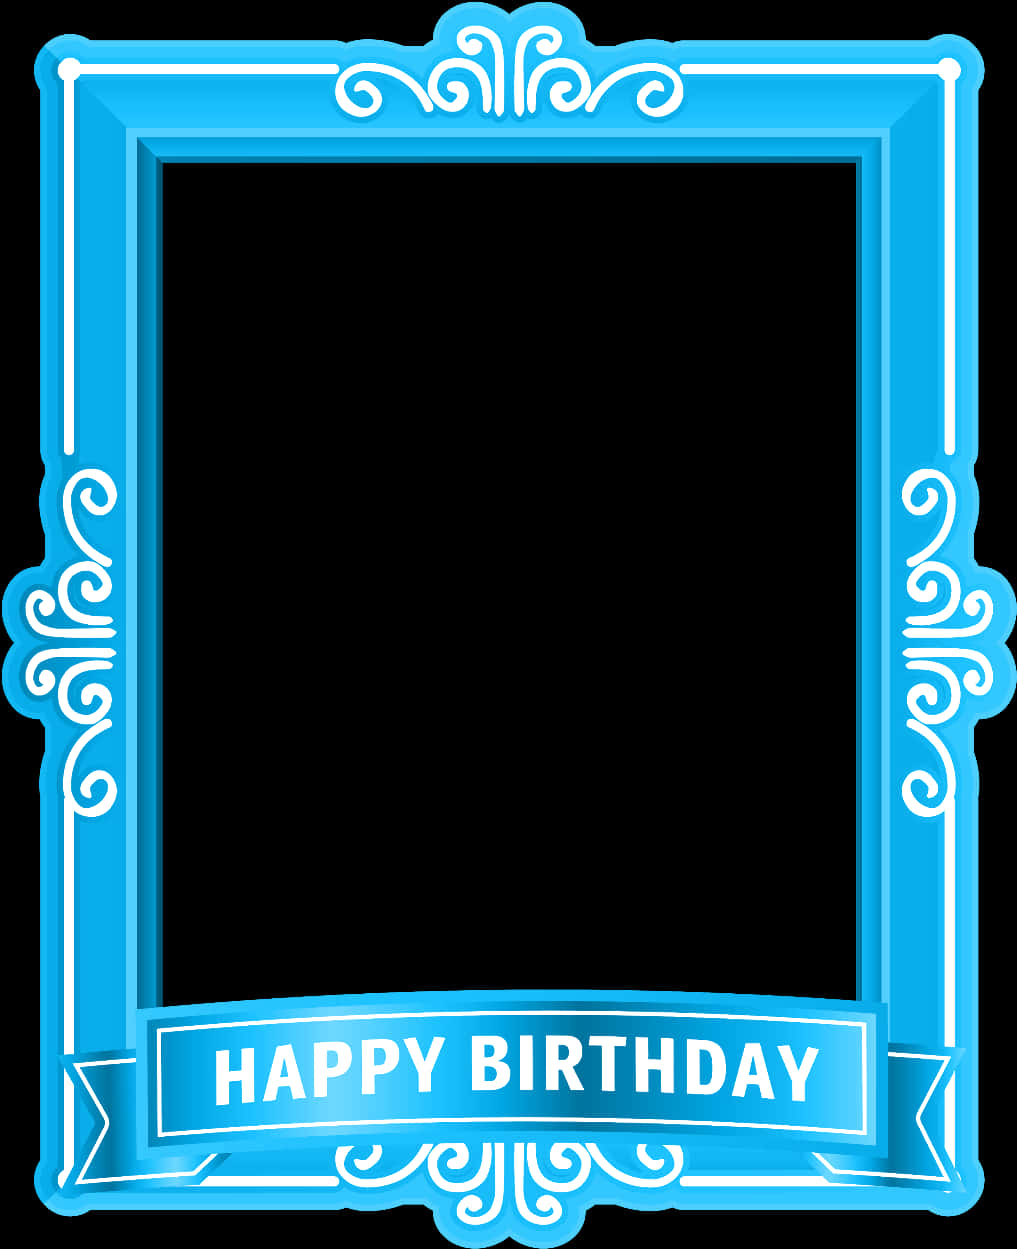 A Blue Frame With White Text